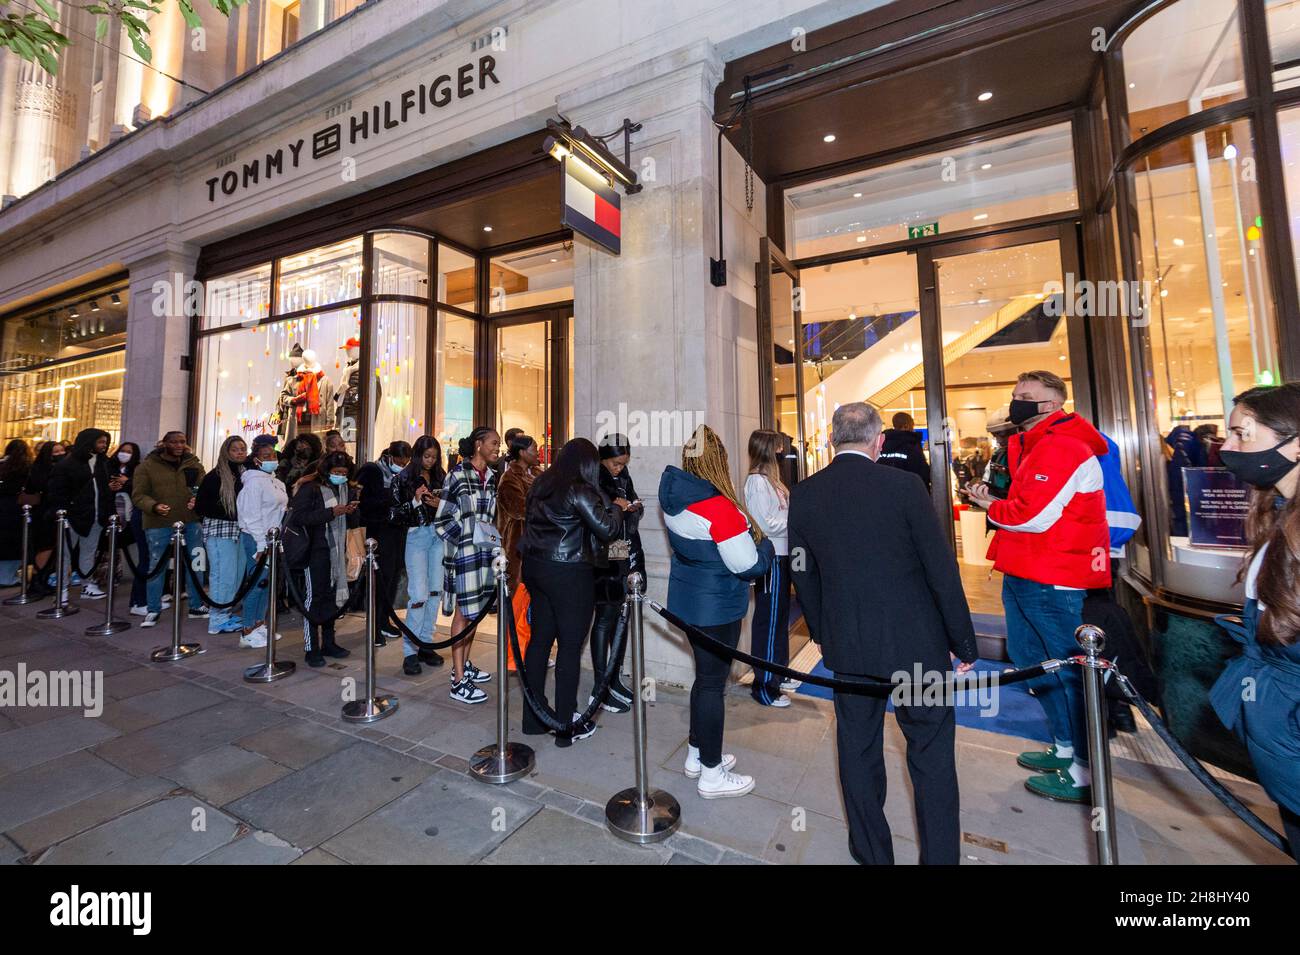 London, UK. 30 November 2021. Invited guests and 'influencers' wait to  enter the Tommy Hilfiger store on Regent Street. They will see a public  appearance inside with designer Tommy Hilfiger and Nigerian